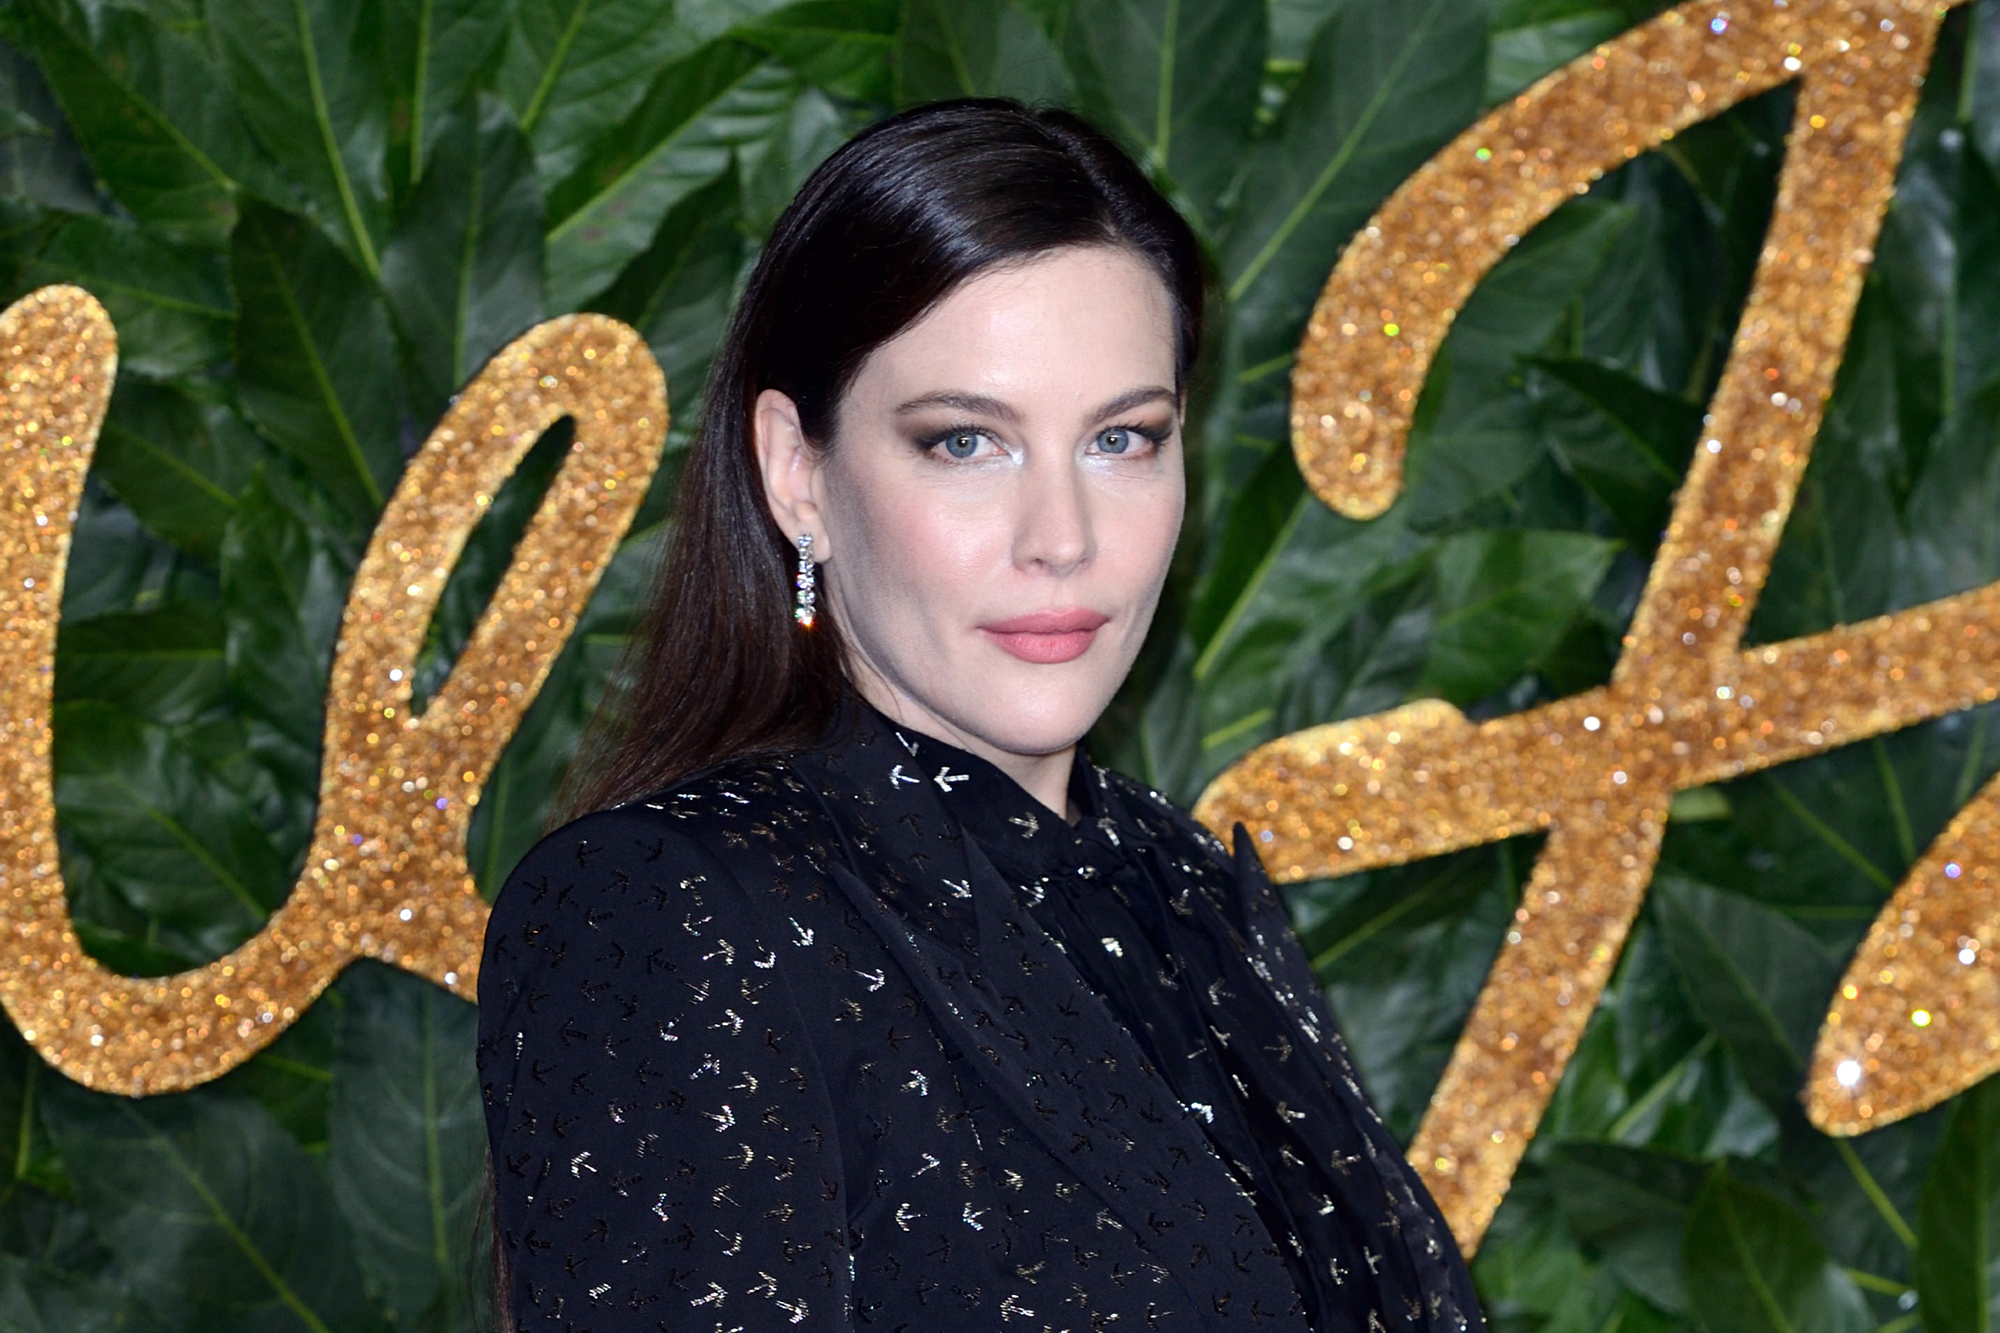 The Purifying Mask Liv Tyler Loves Is 25% Off — But Not for Long